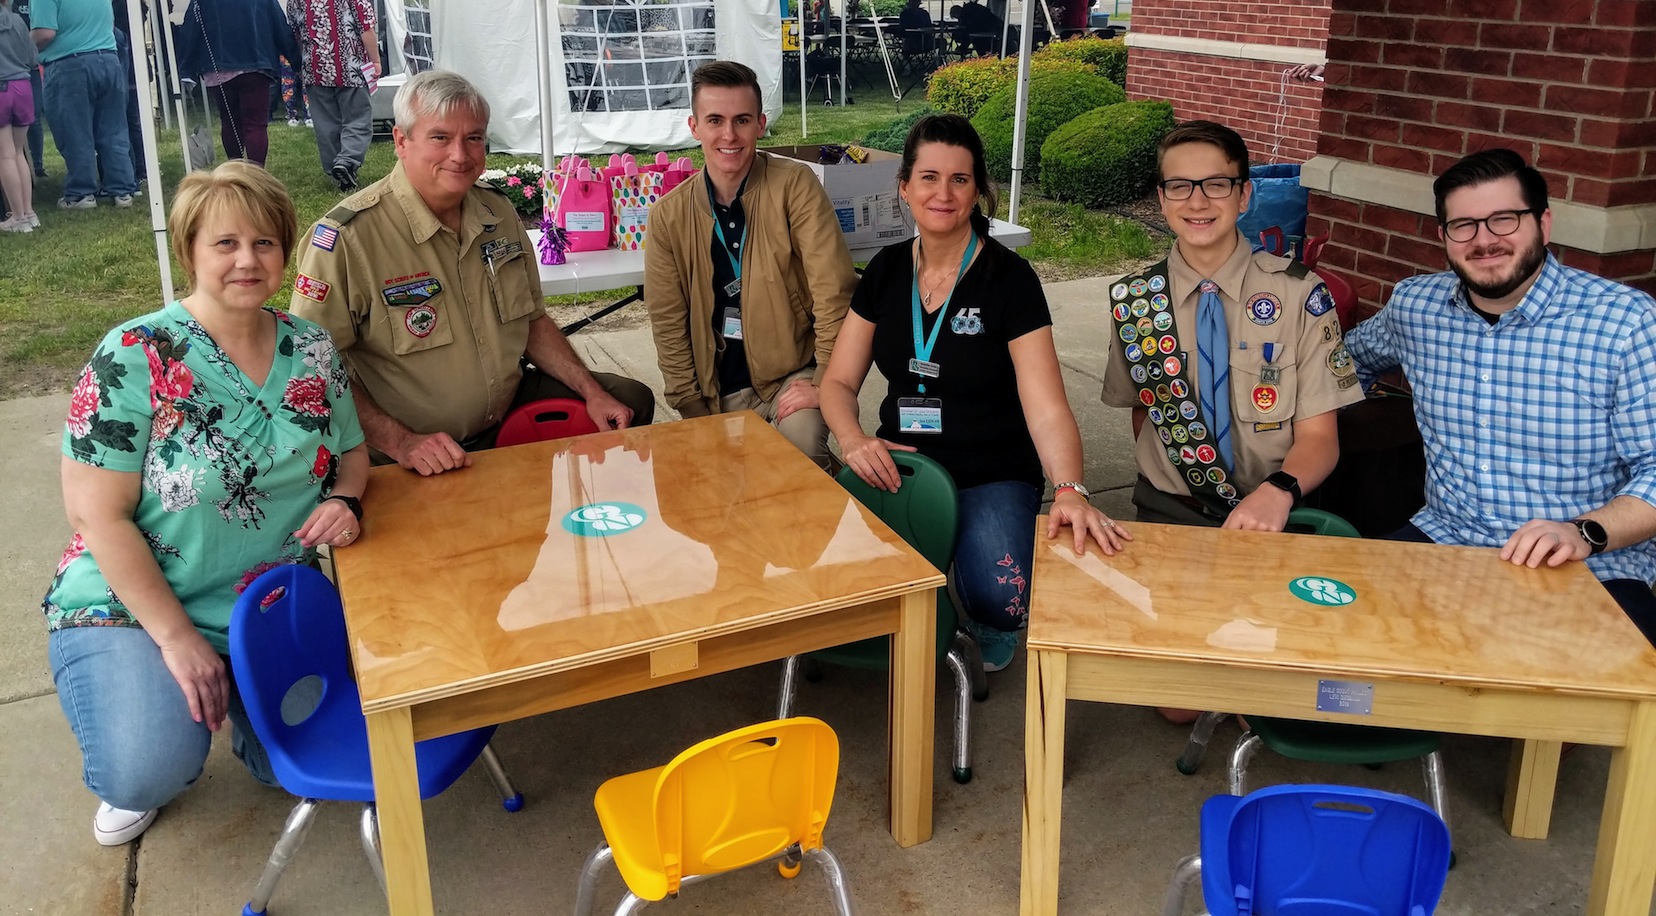 From left, Jackie Siegmann; Mark Gaynor, scoutmaster Troop 824; Austin Tylec and Jennifer Grier of GNFCU; Levi Siegmann, Eagle Scout candidate; and Kason Dietz of The Hope Center.